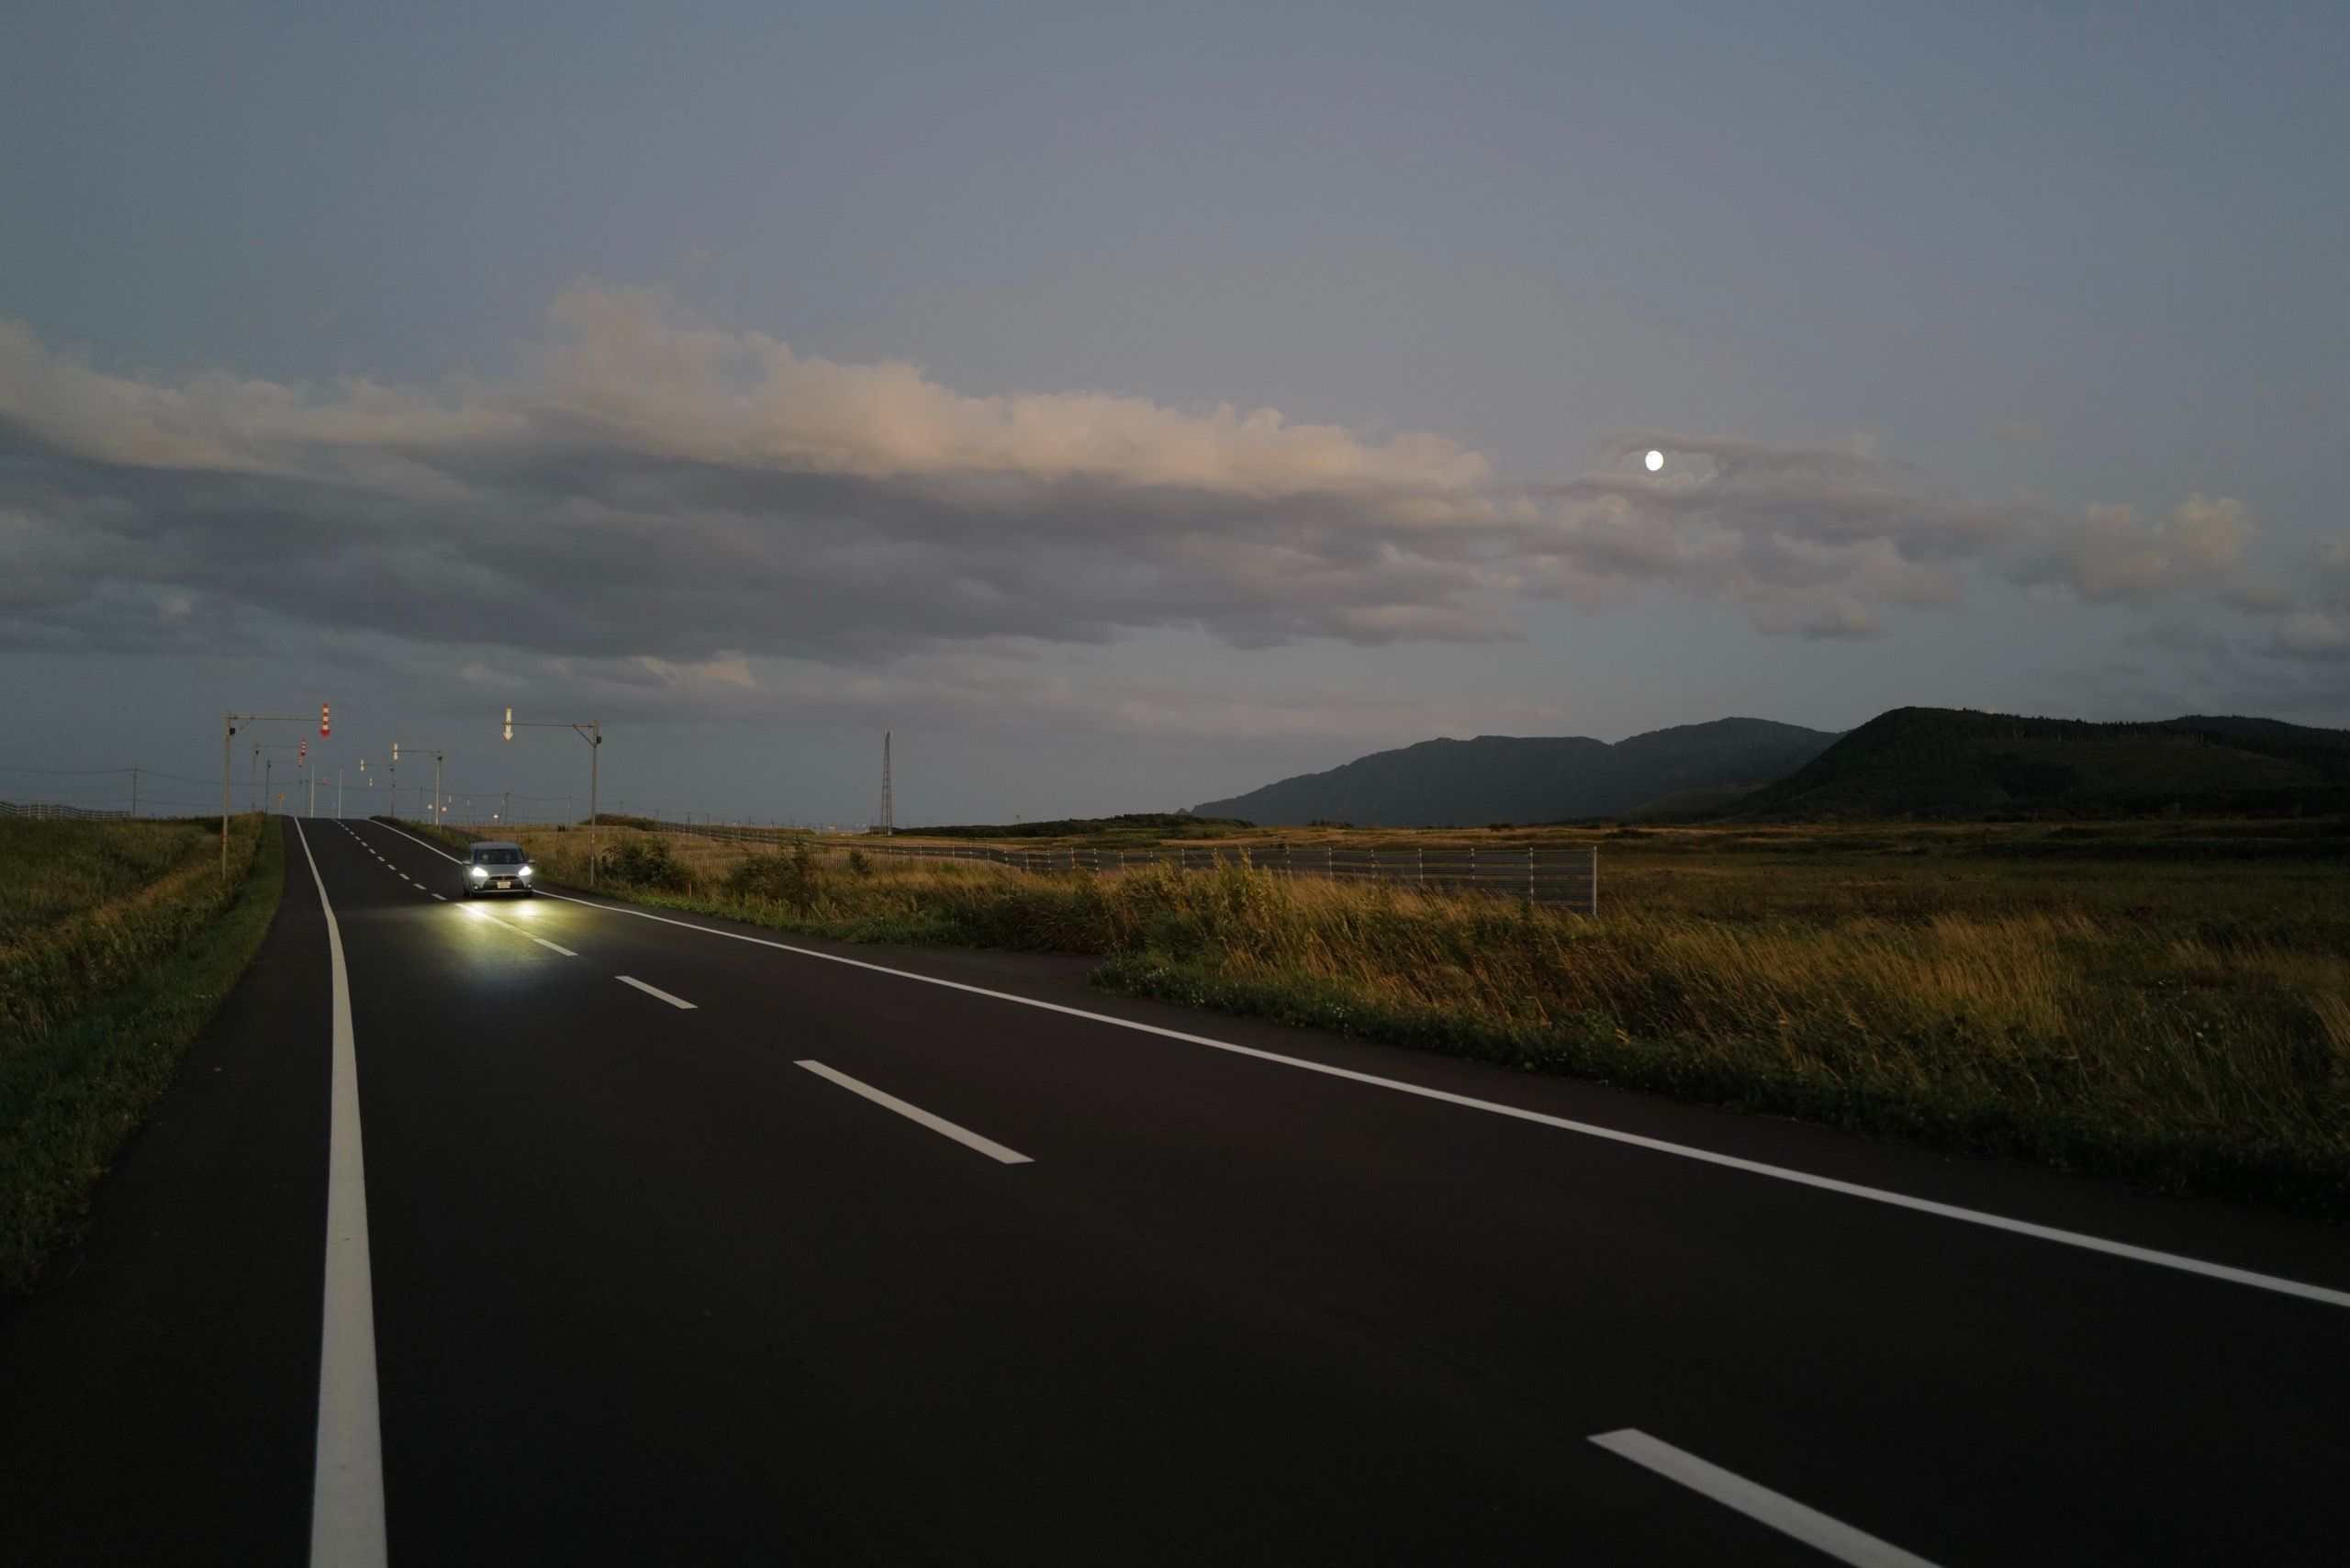 A car drives down a country road in the moonlight